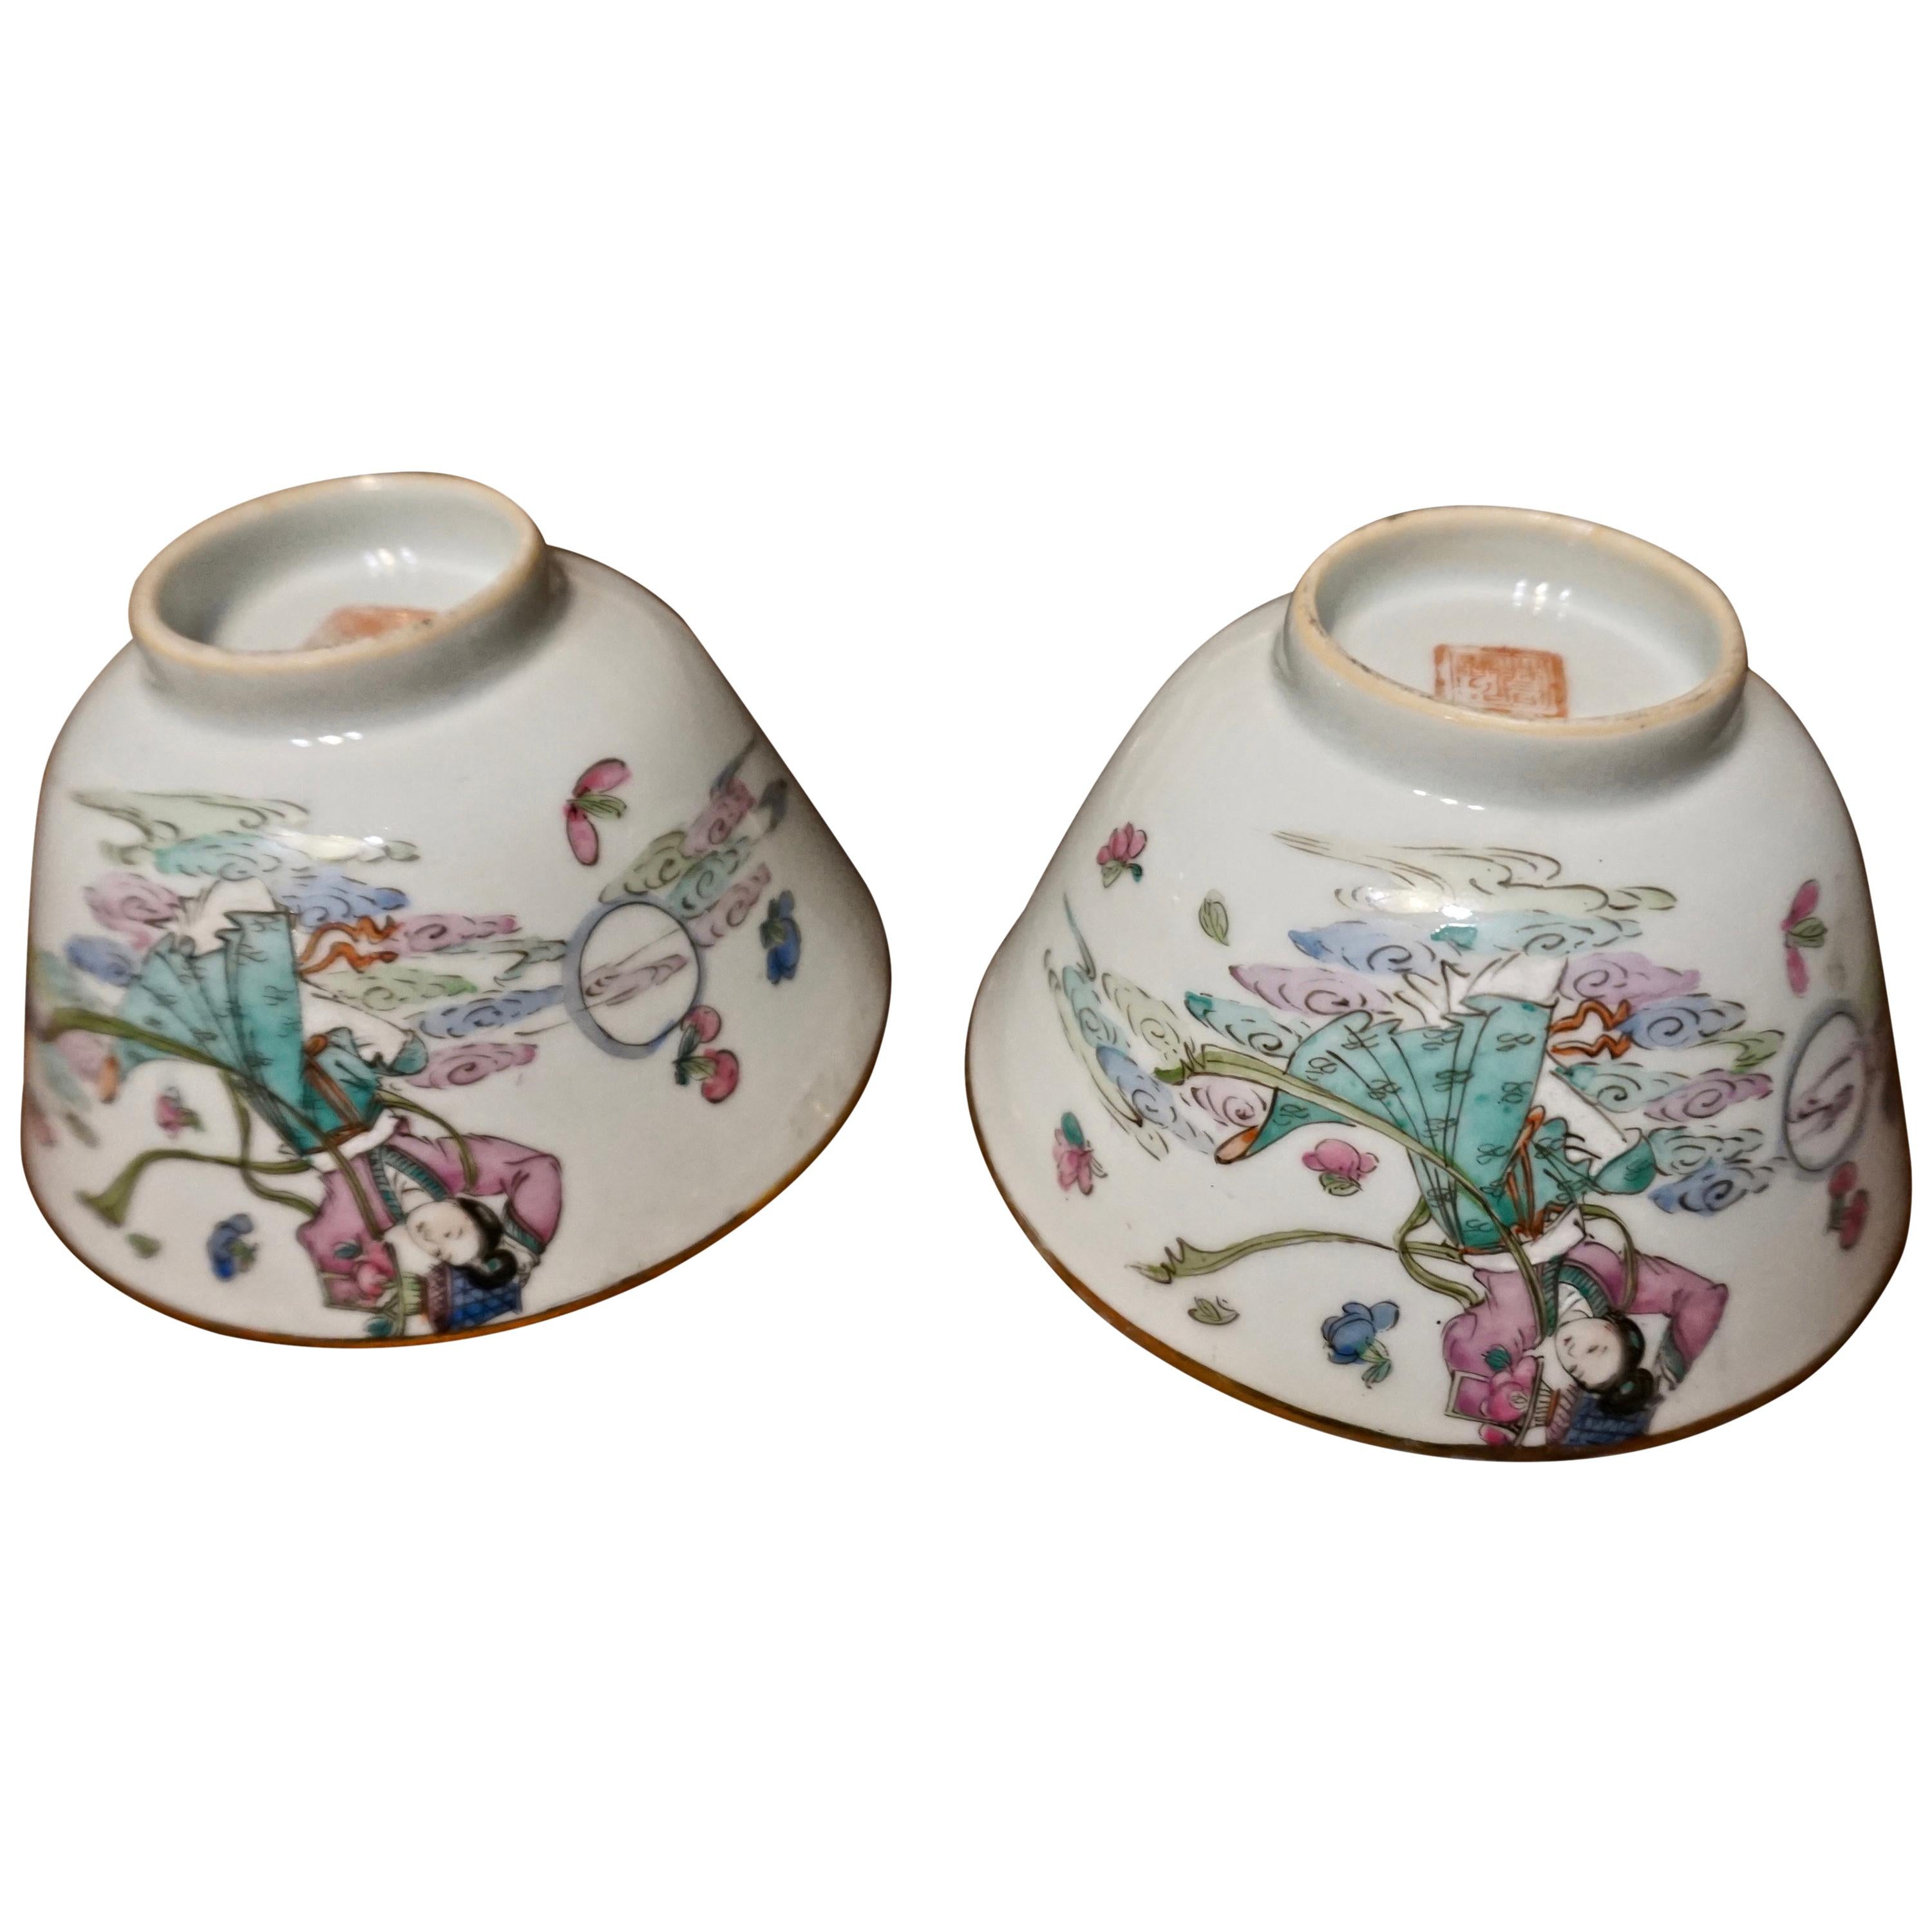 1920s Chinese Export Hand Painted Ceramic Bowls